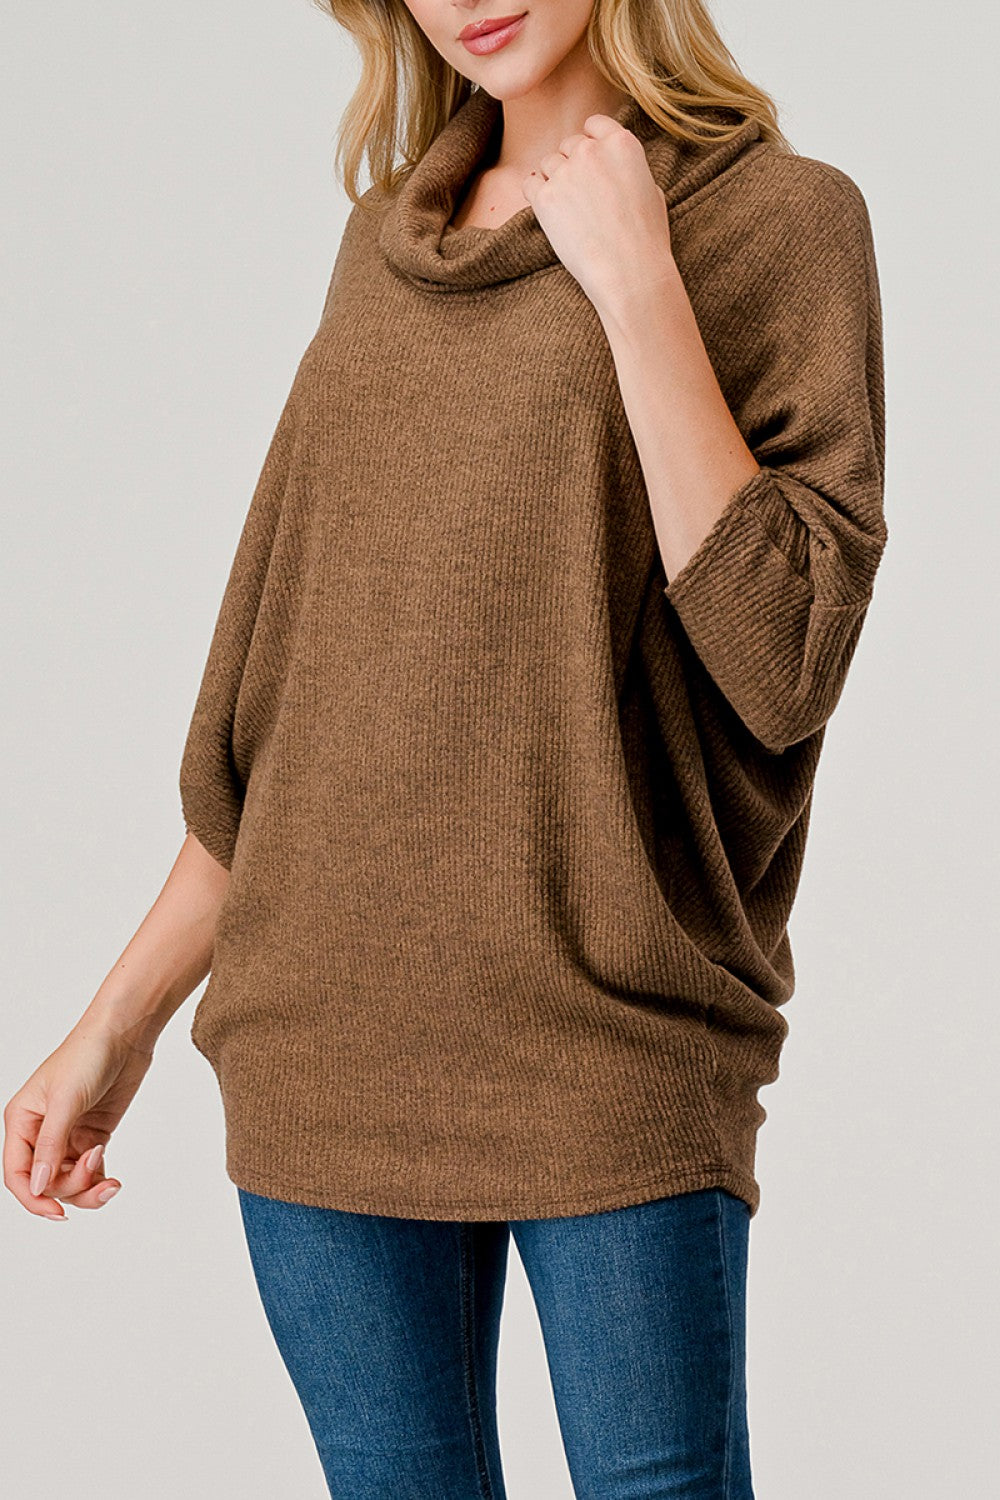 Natural Vibe Cowl Neck Sweater (Coffee)